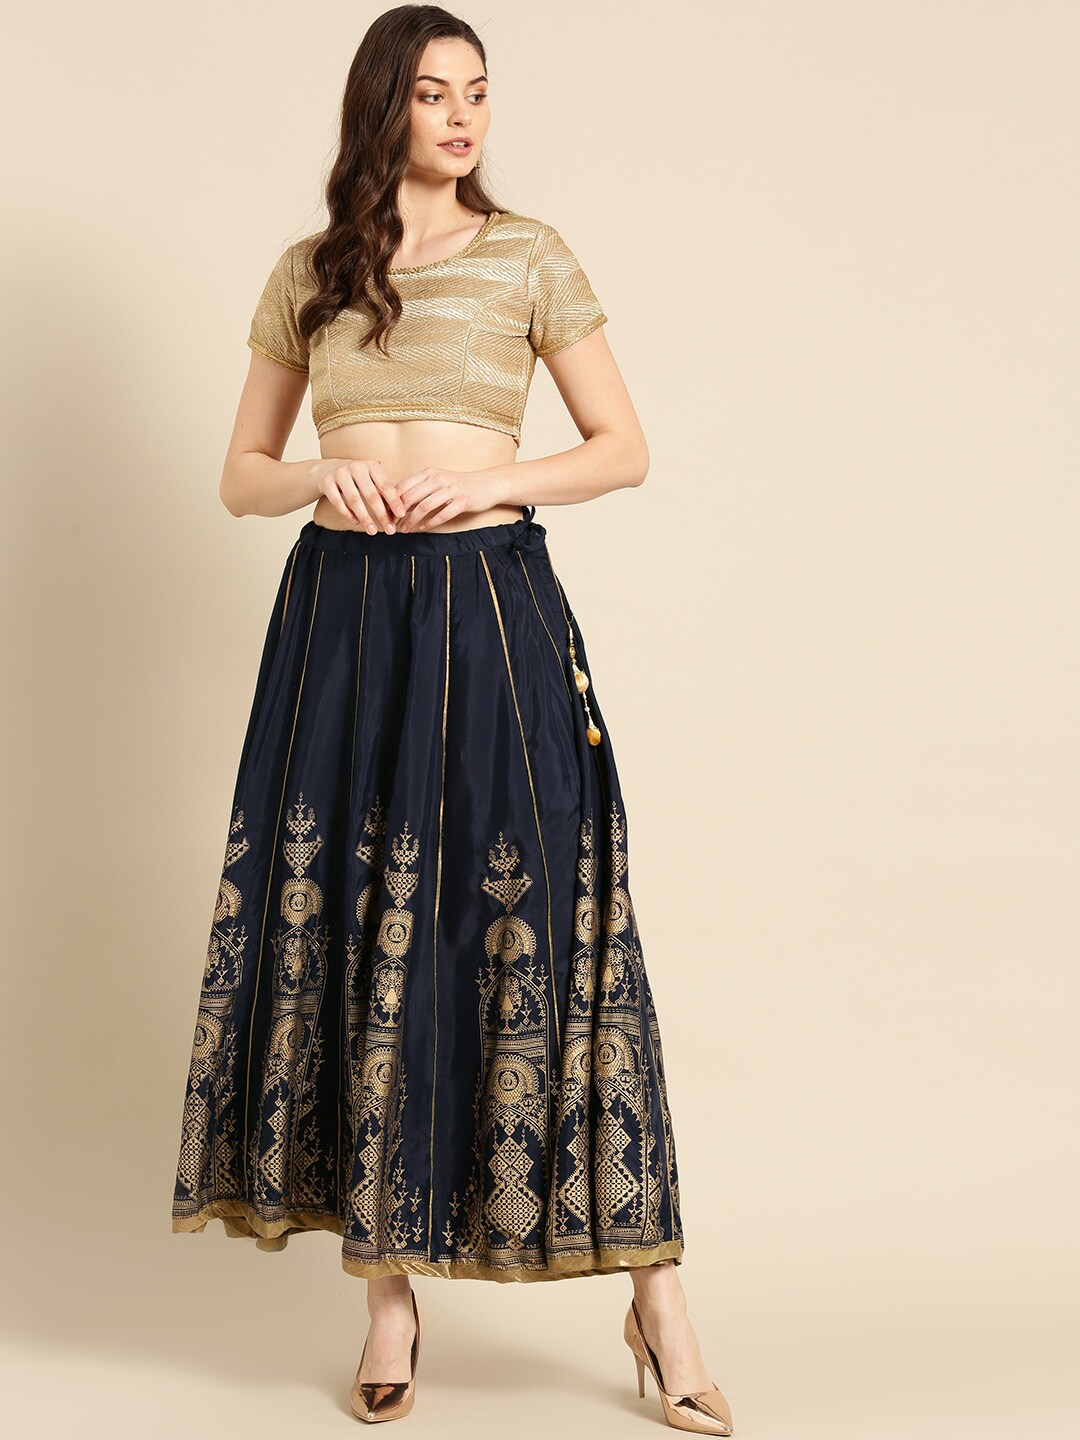 IMARA Navy Blue & Golden Ready to Wear Lehenga with Blouse Price in India